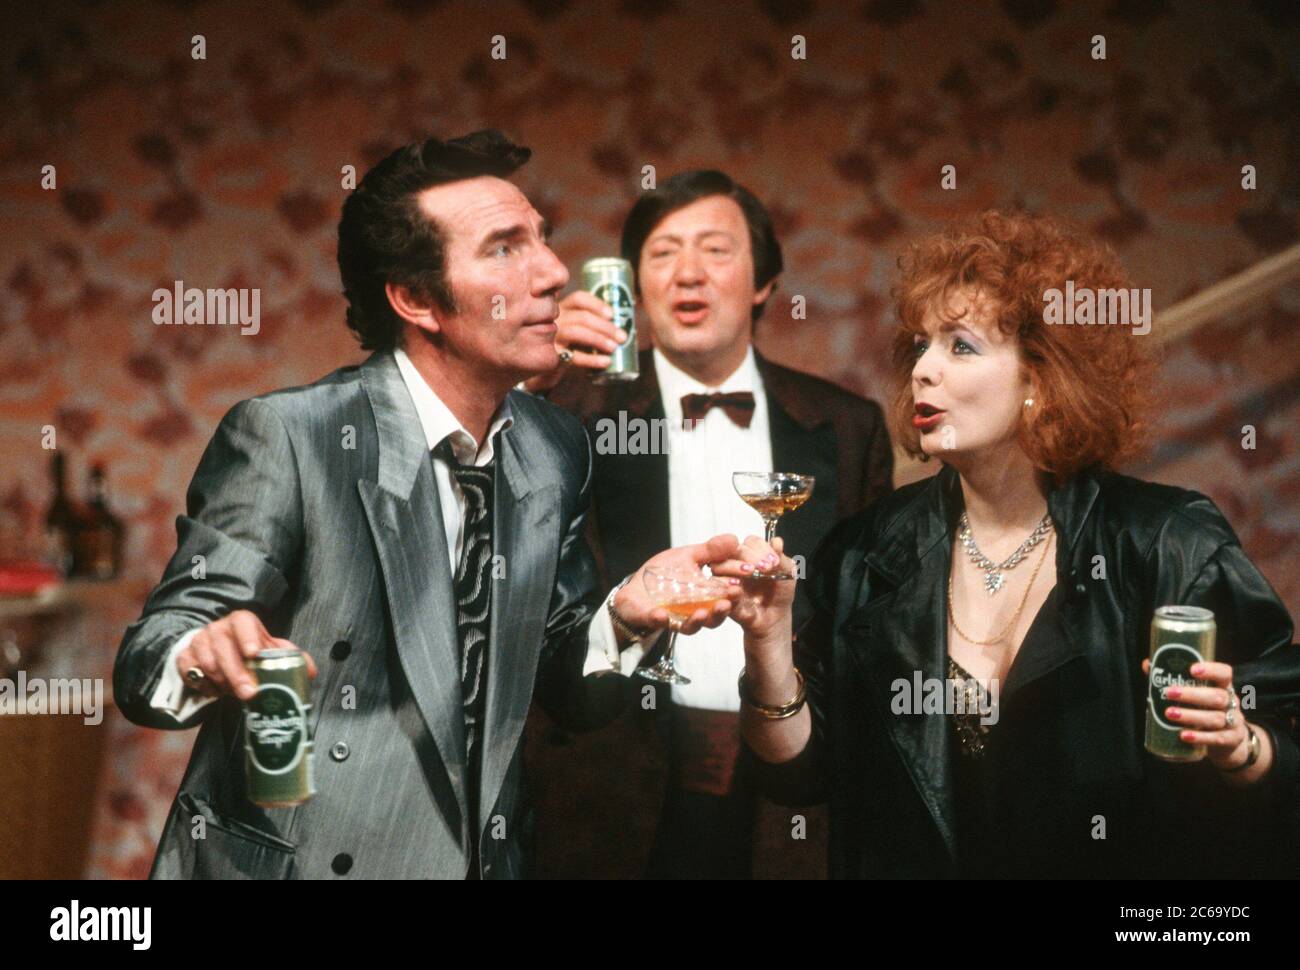 l-r: Pete Postlethwaite (Ray Say), George Raistrick (Mr Boo), Alison Steadman (Mari Hoff) in THE RISE AND FALL OF LITTLE VOICE by Jim Cartwright at the  Cottesloe Theatre, National Theatre (NT), London SE1 16/06/1992  music: Terry Davies design: William Dudley lighting: Mick Hughes movement: Jane Gibson director: Sam Mendes Stock Photo